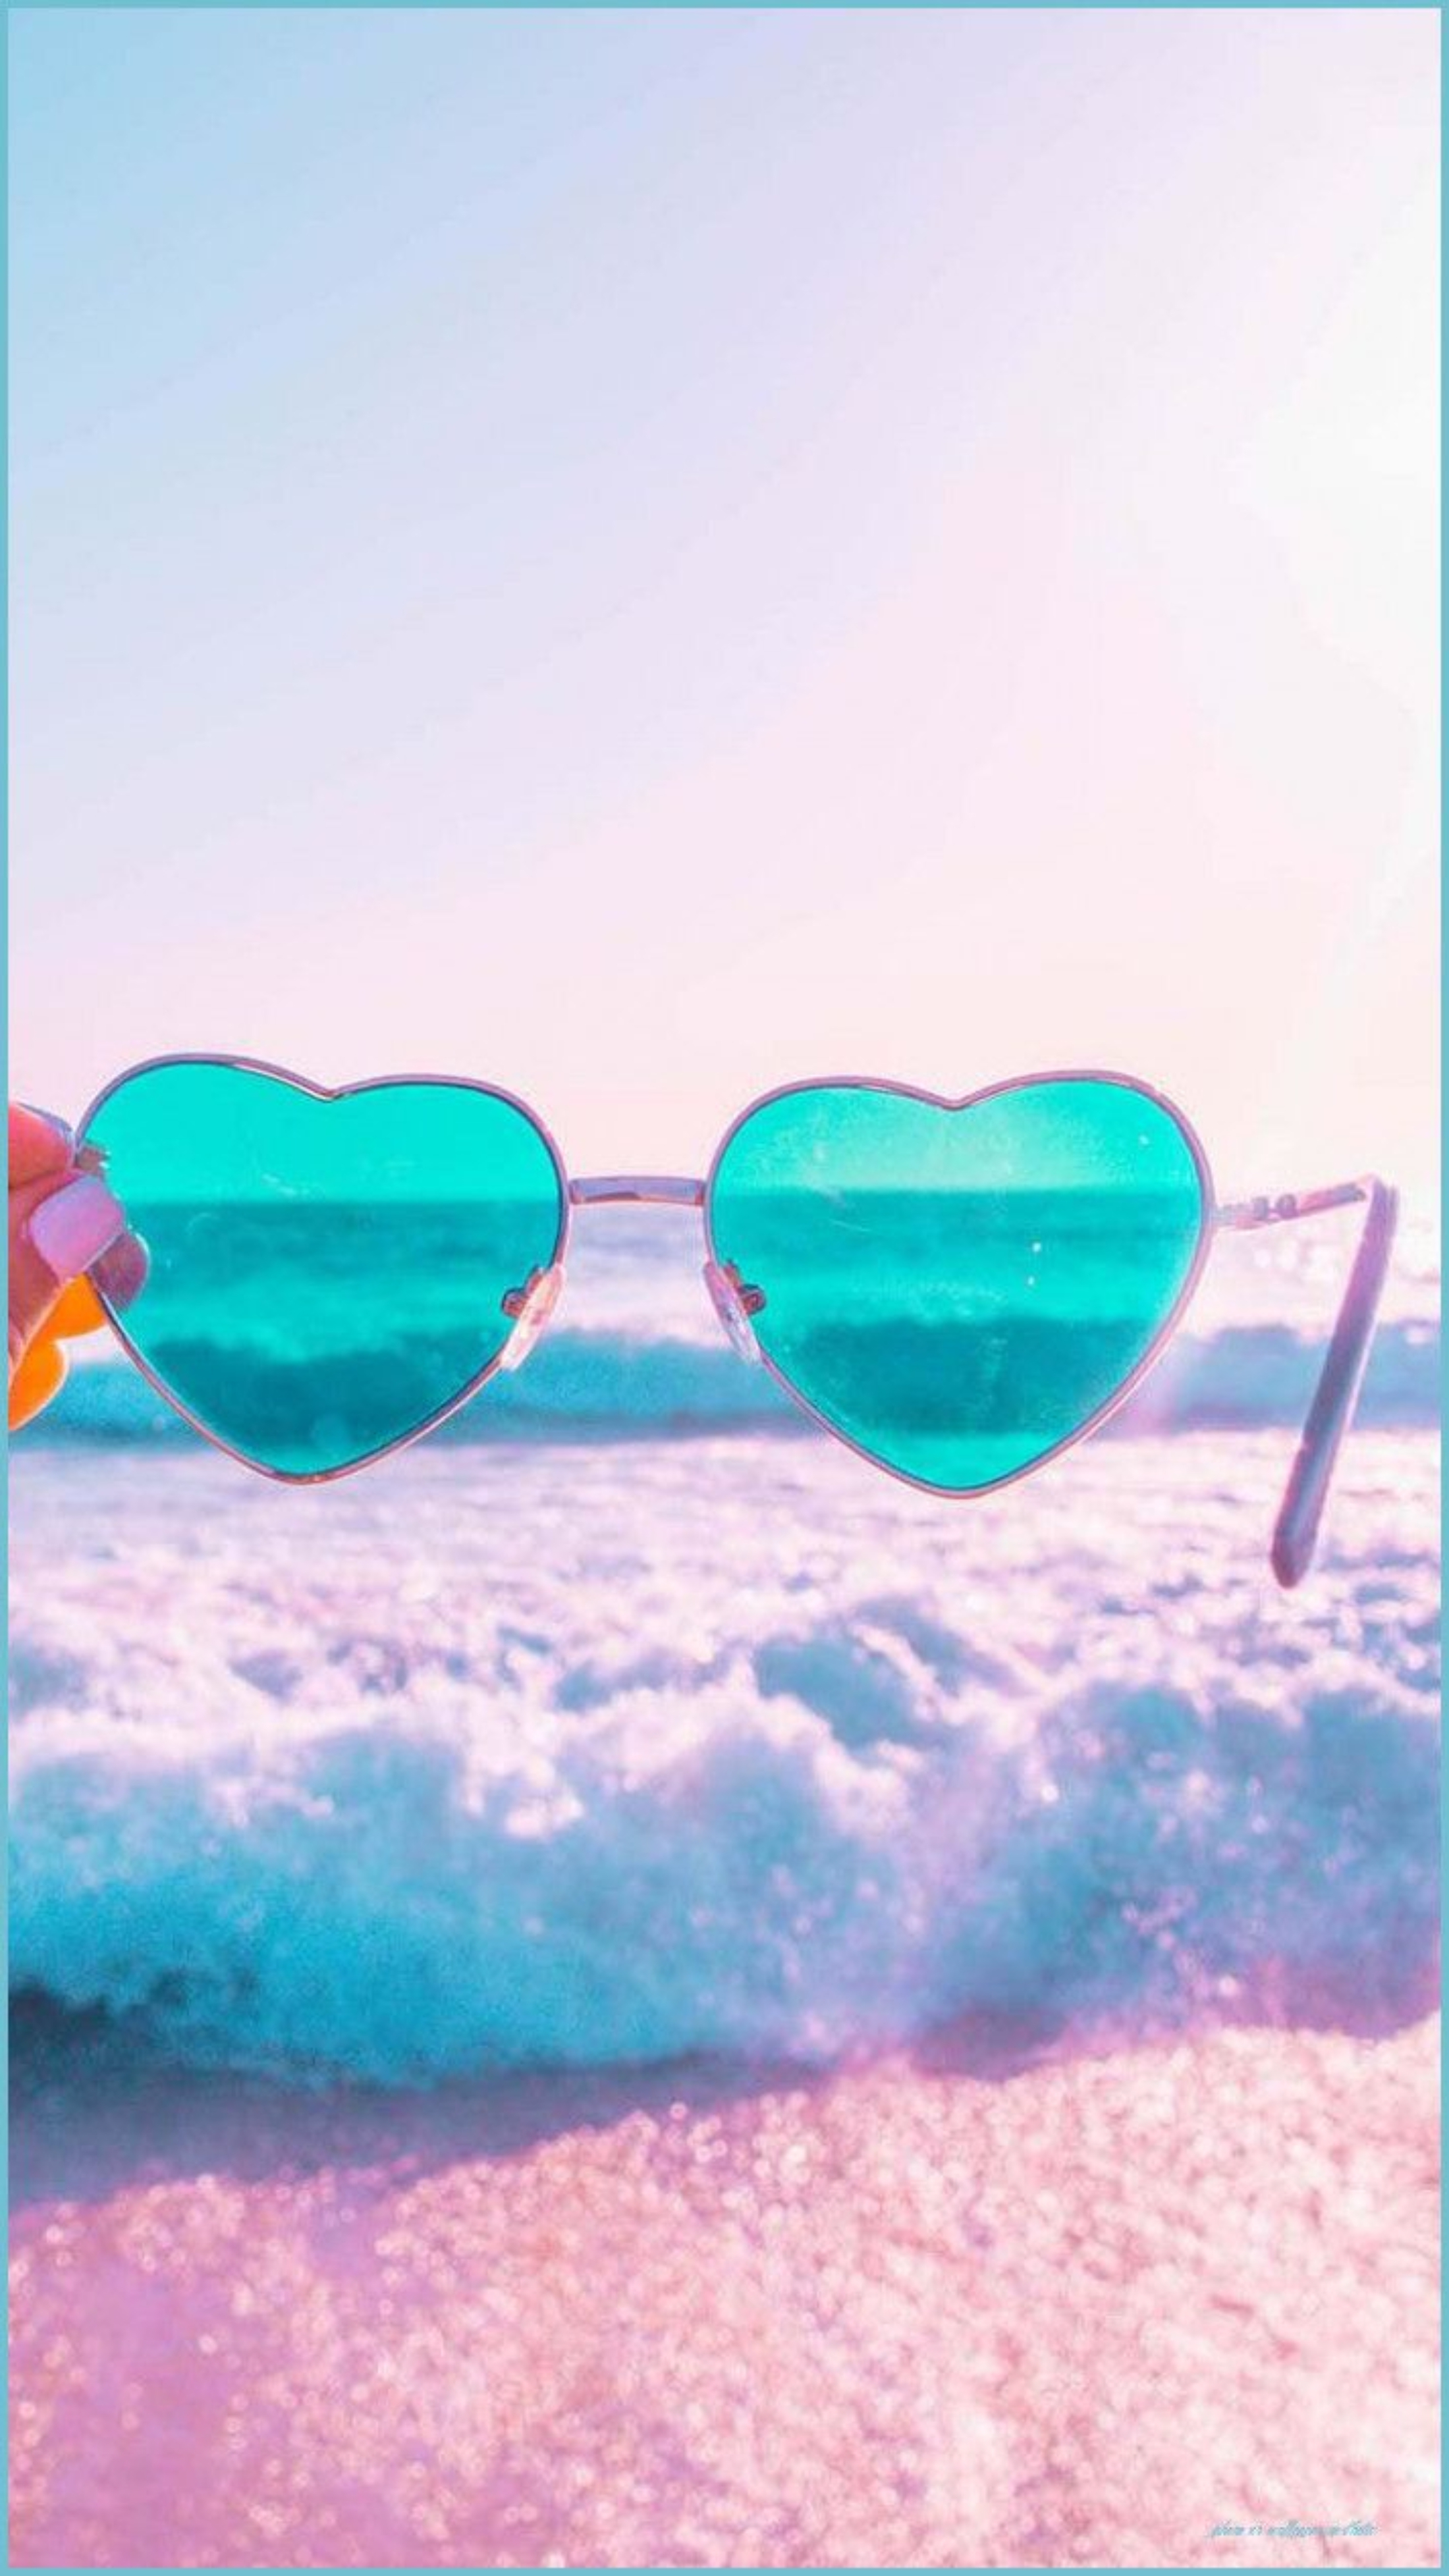 You are currently viewing Sunglasses preppy aesthetic wallpaper